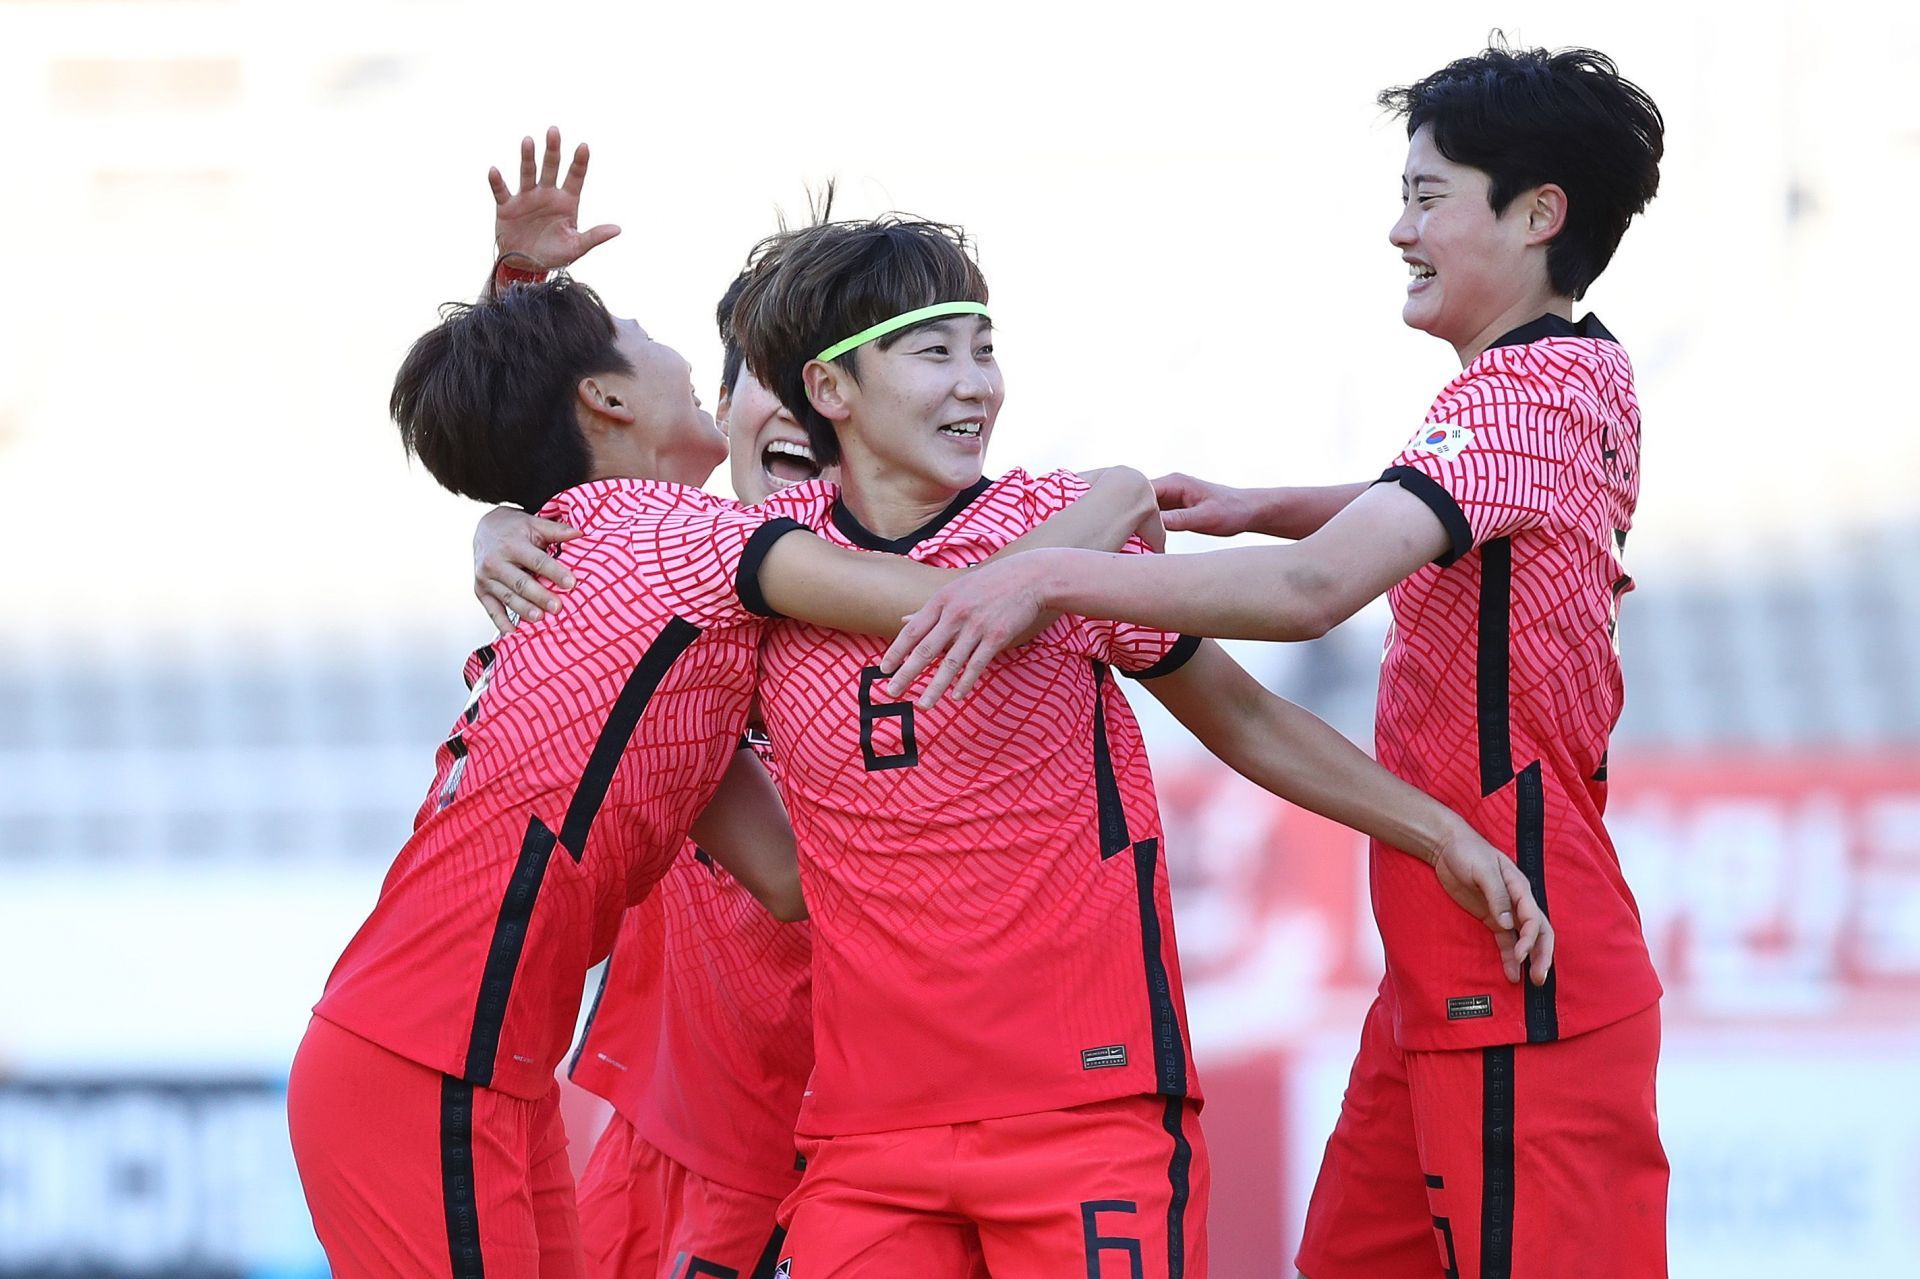 South Korea will be making their thirteenth appearance in the tournament.